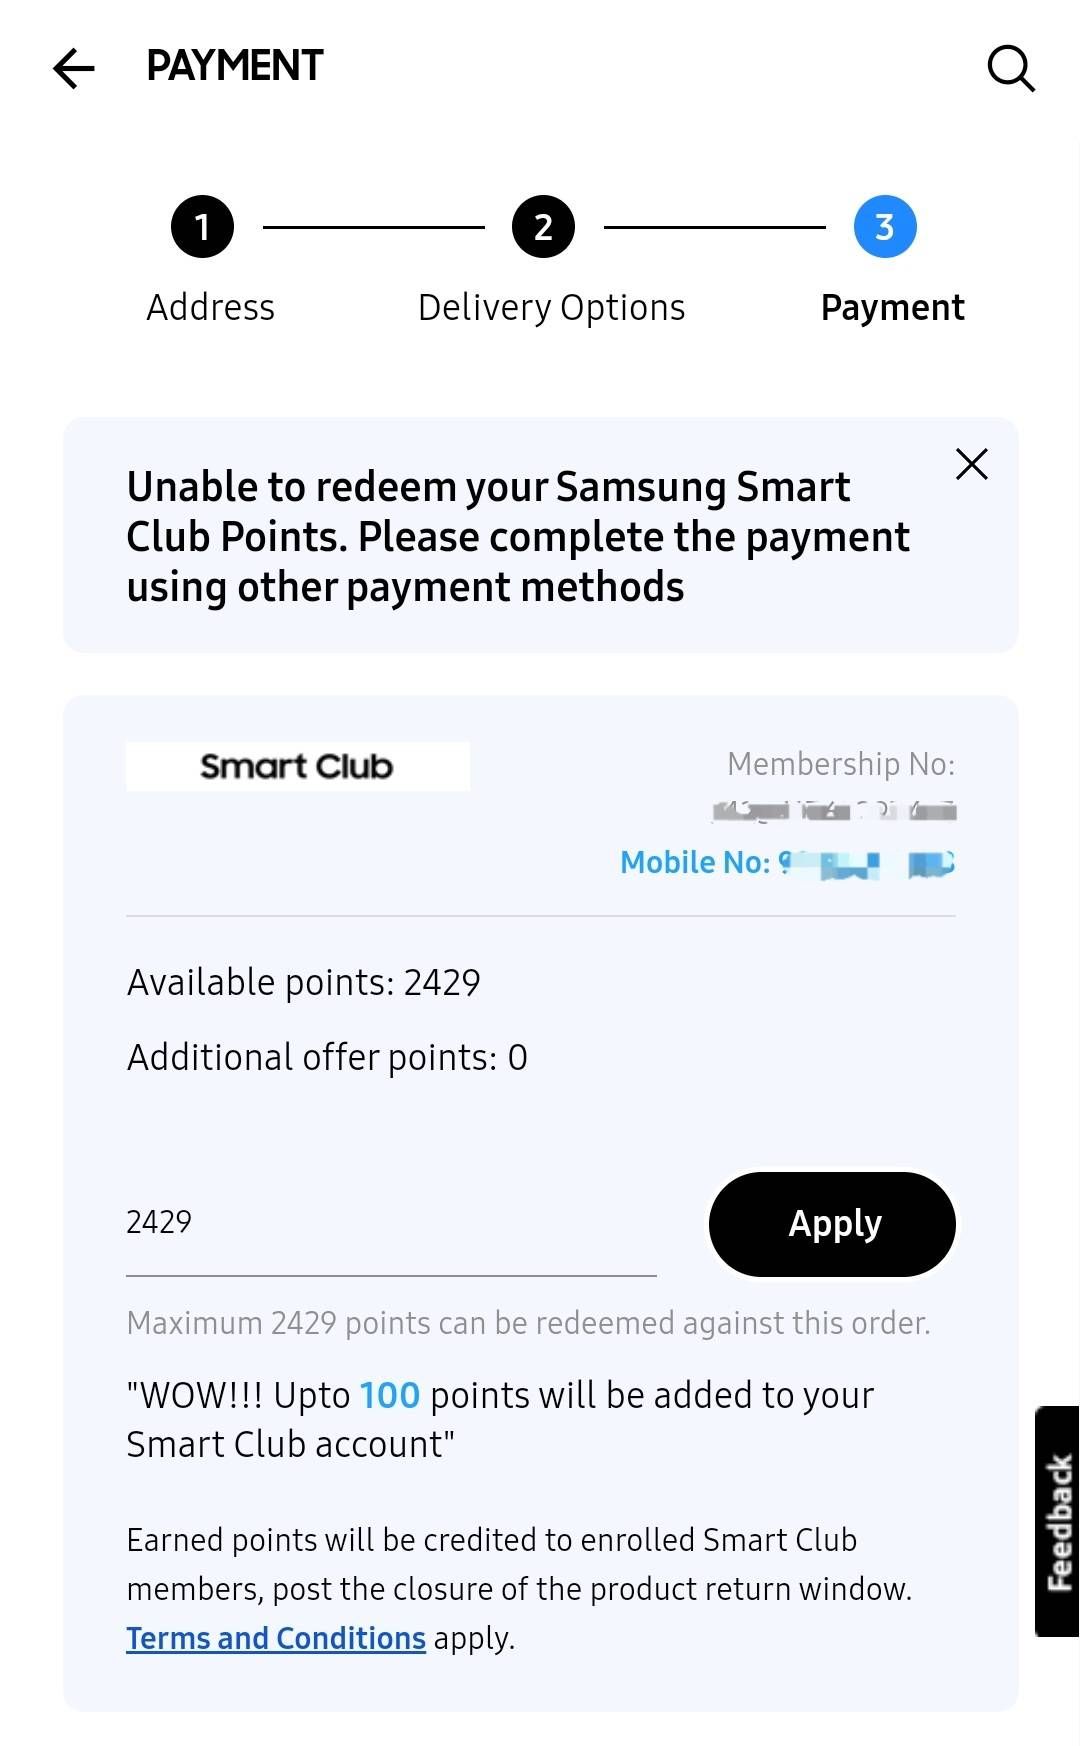 Solved: Check Comments] Unable to redeem Smart Cl - Samsung Members